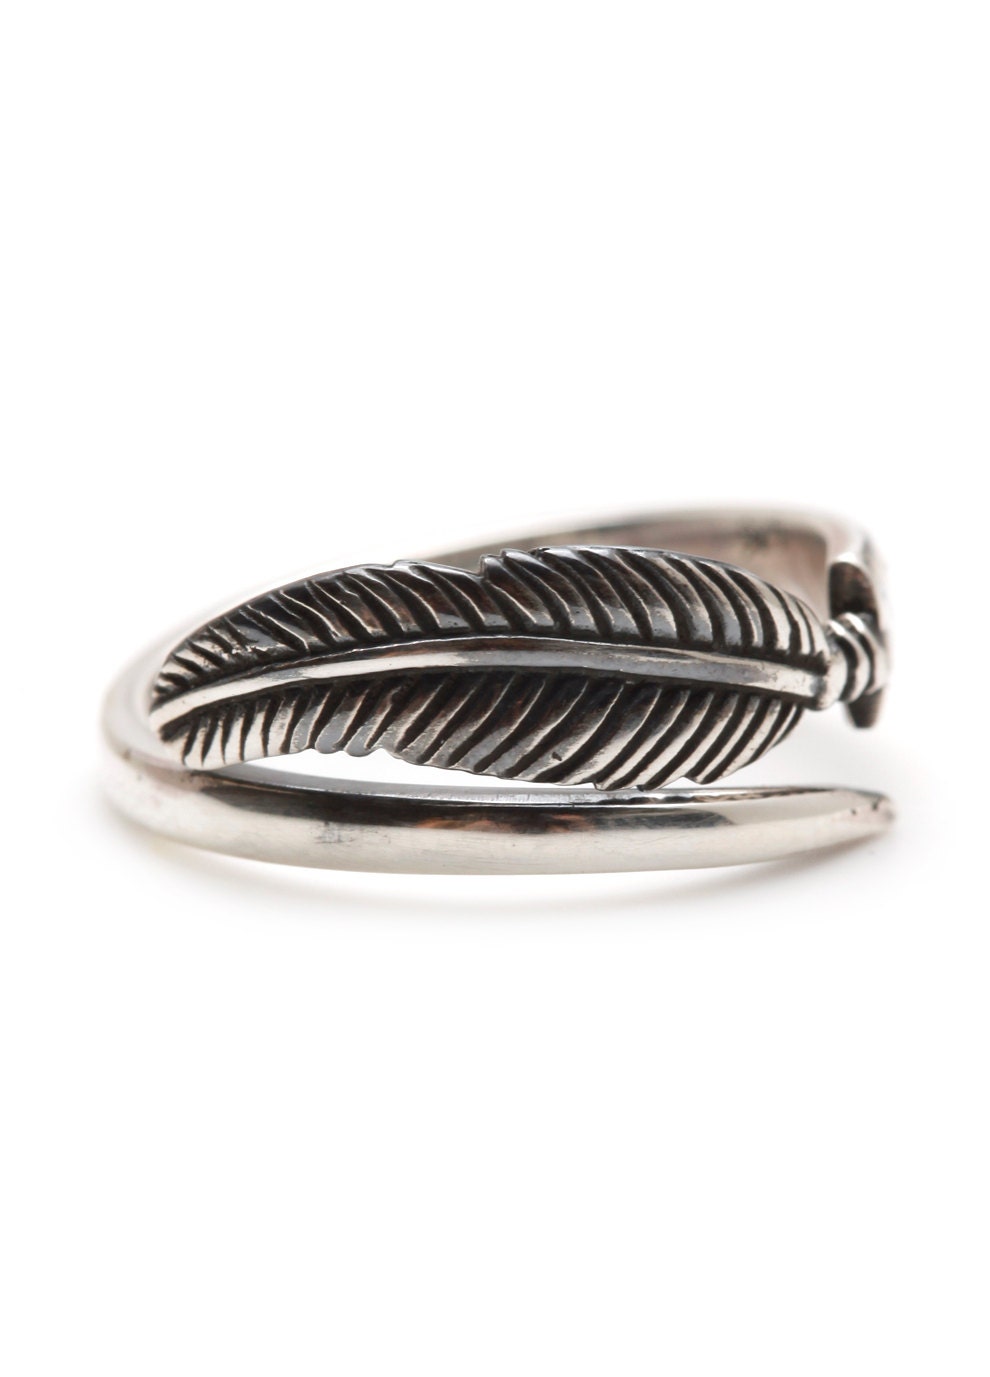 Silver Feather Ring Womens Sterling Rings by carpediemjewellery